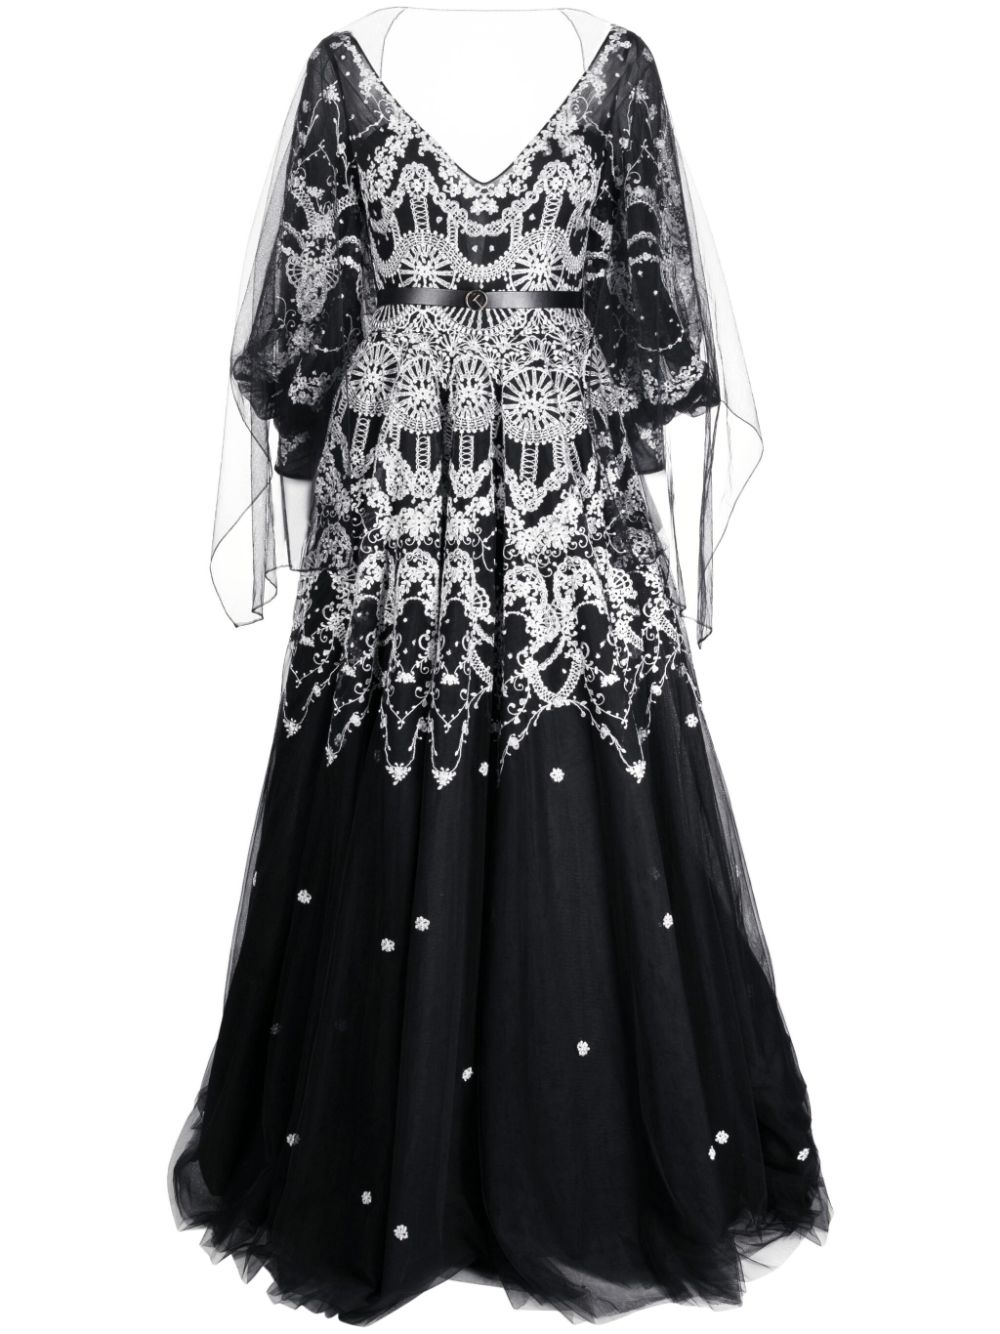 Saiid Kobeisy patterned-lace flared tulle gown - Black von Saiid Kobeisy